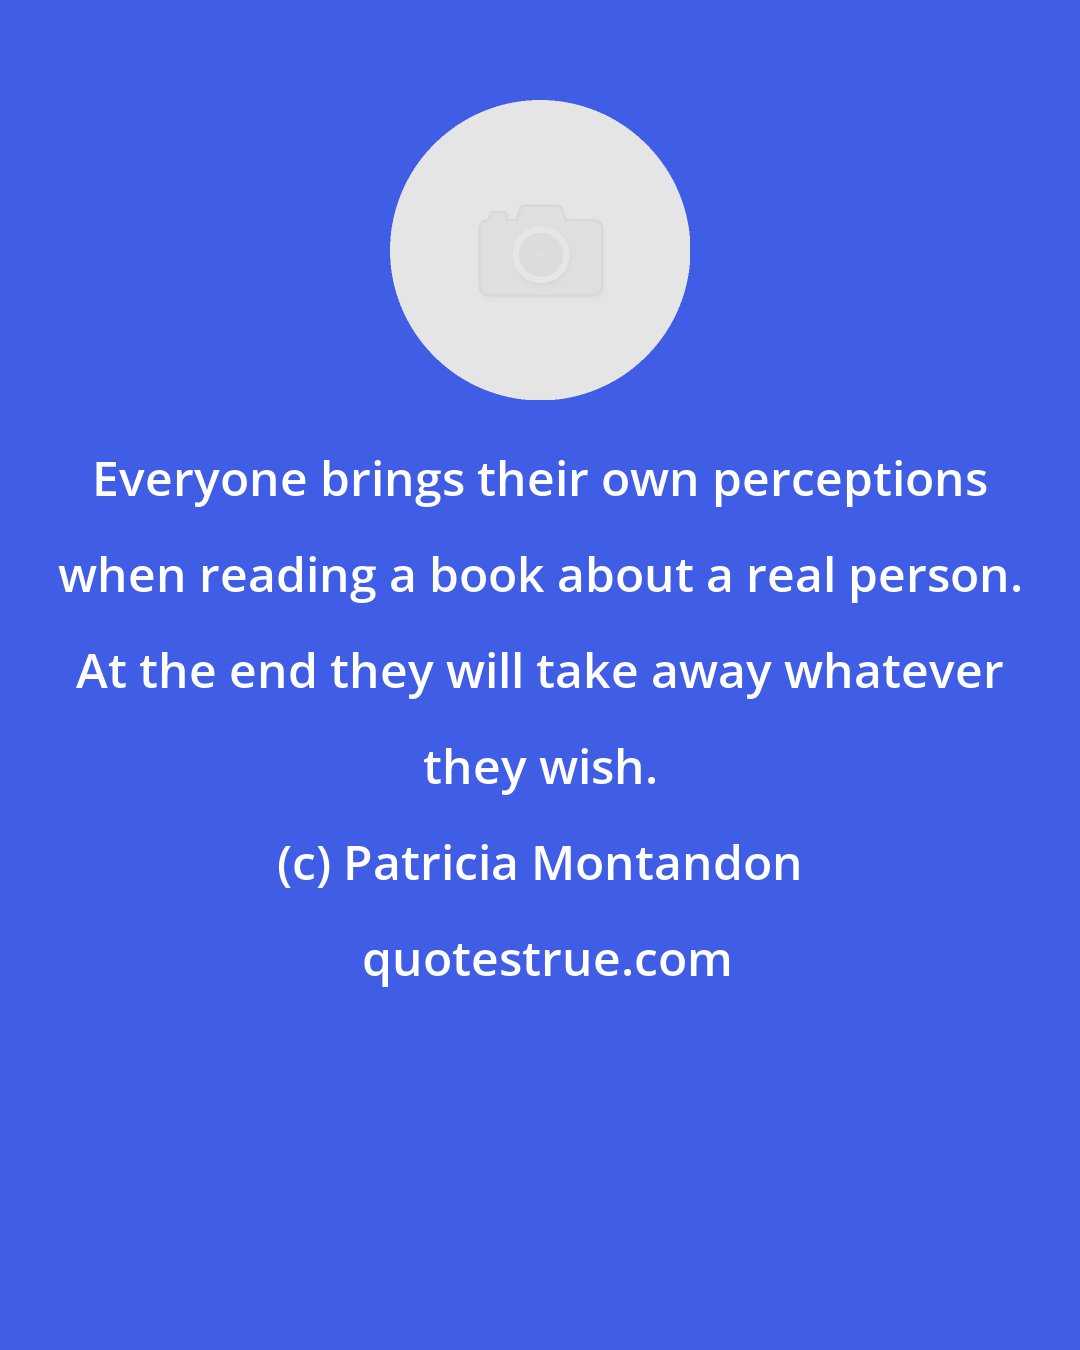 Patricia Montandon: Everyone brings their own perceptions when reading a book about a real person. At the end they will take away whatever they wish.